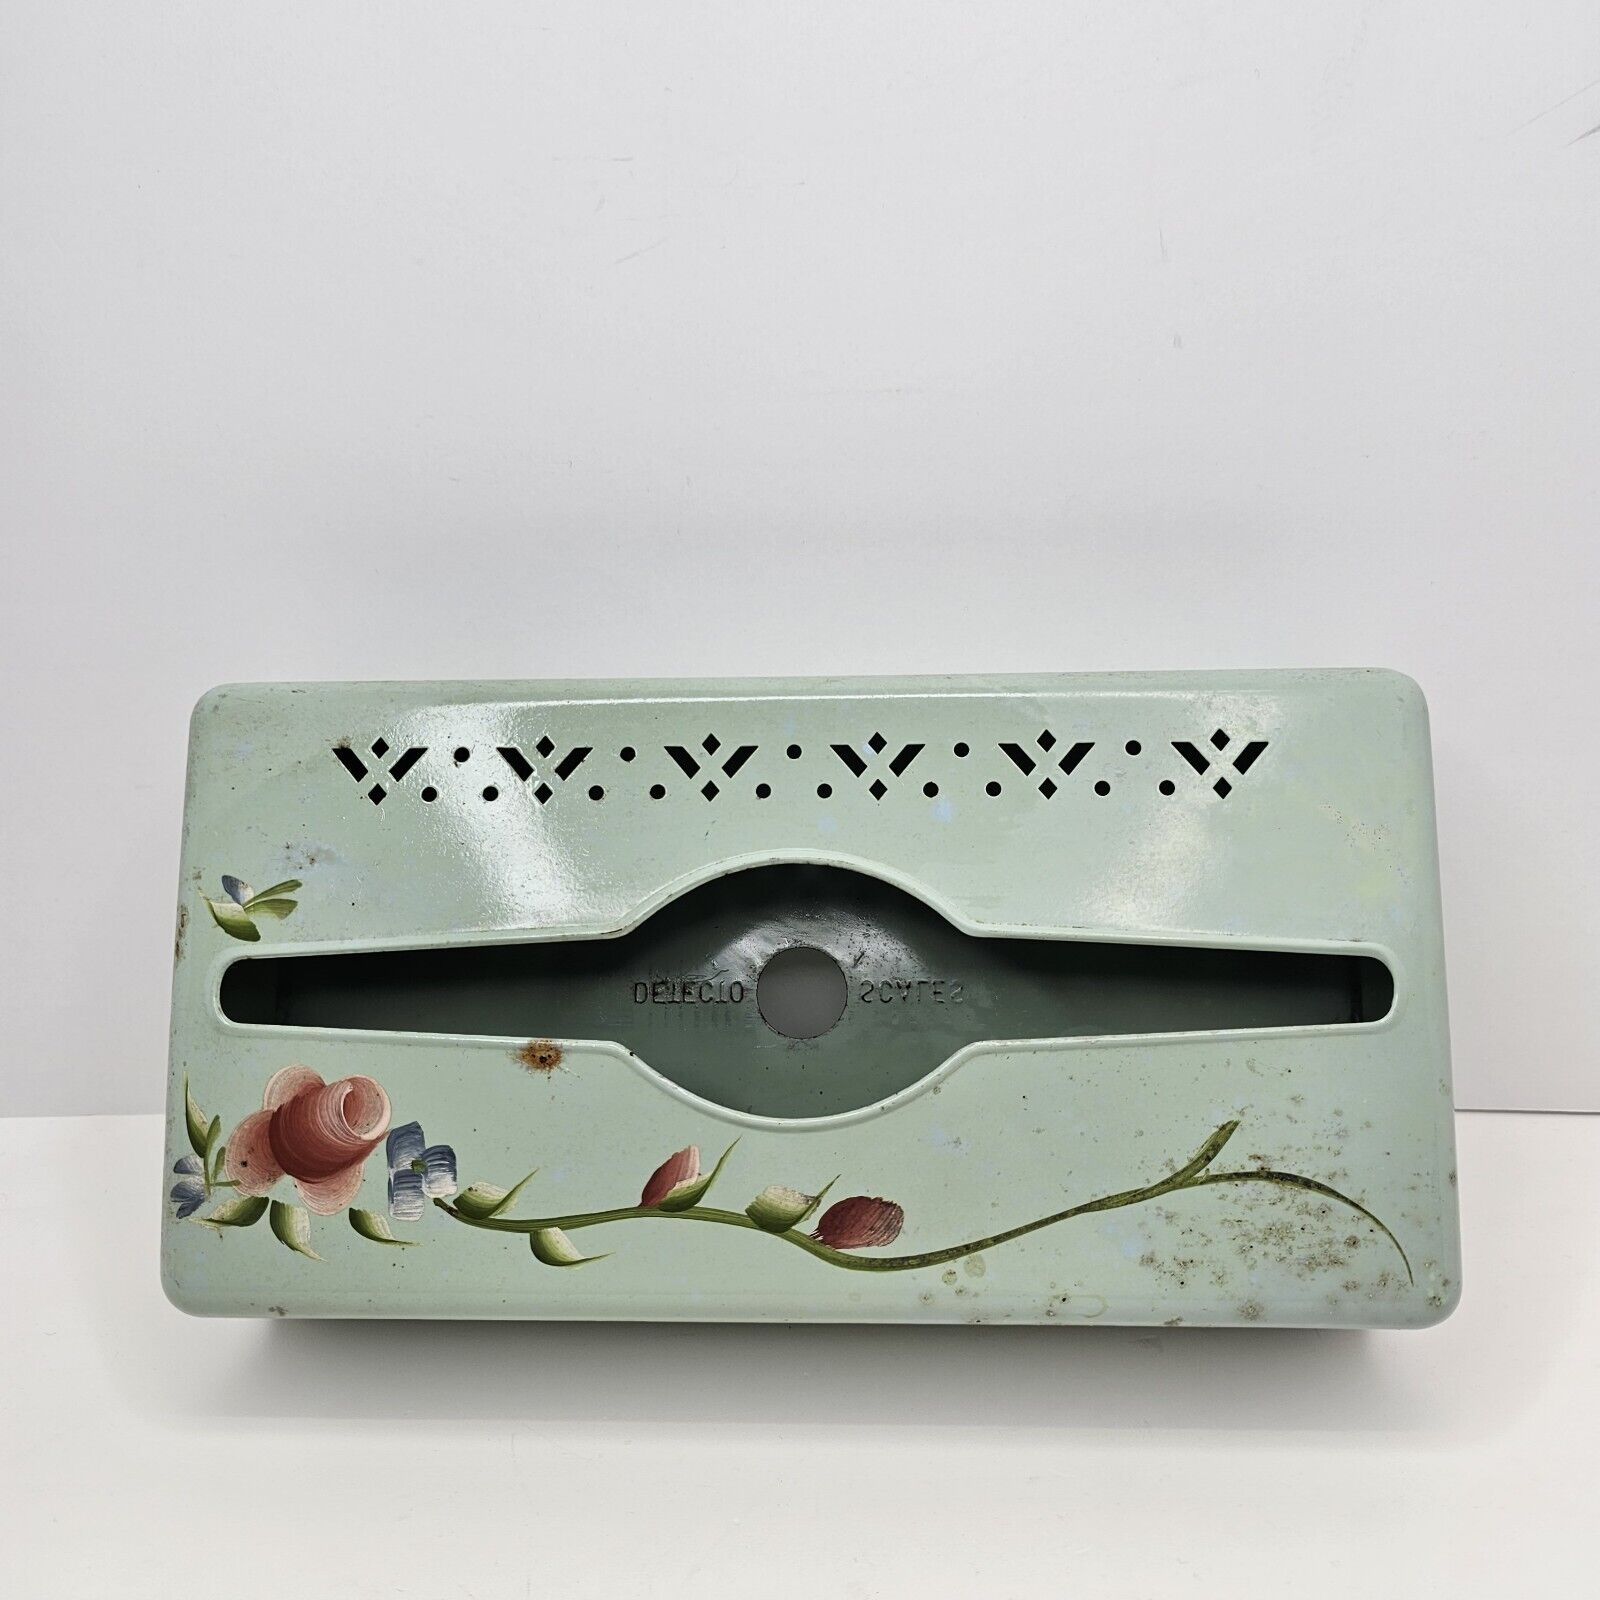 Vintage Tole Painted Detecto Scales Metal Tissue Box Holder Floral Cyan